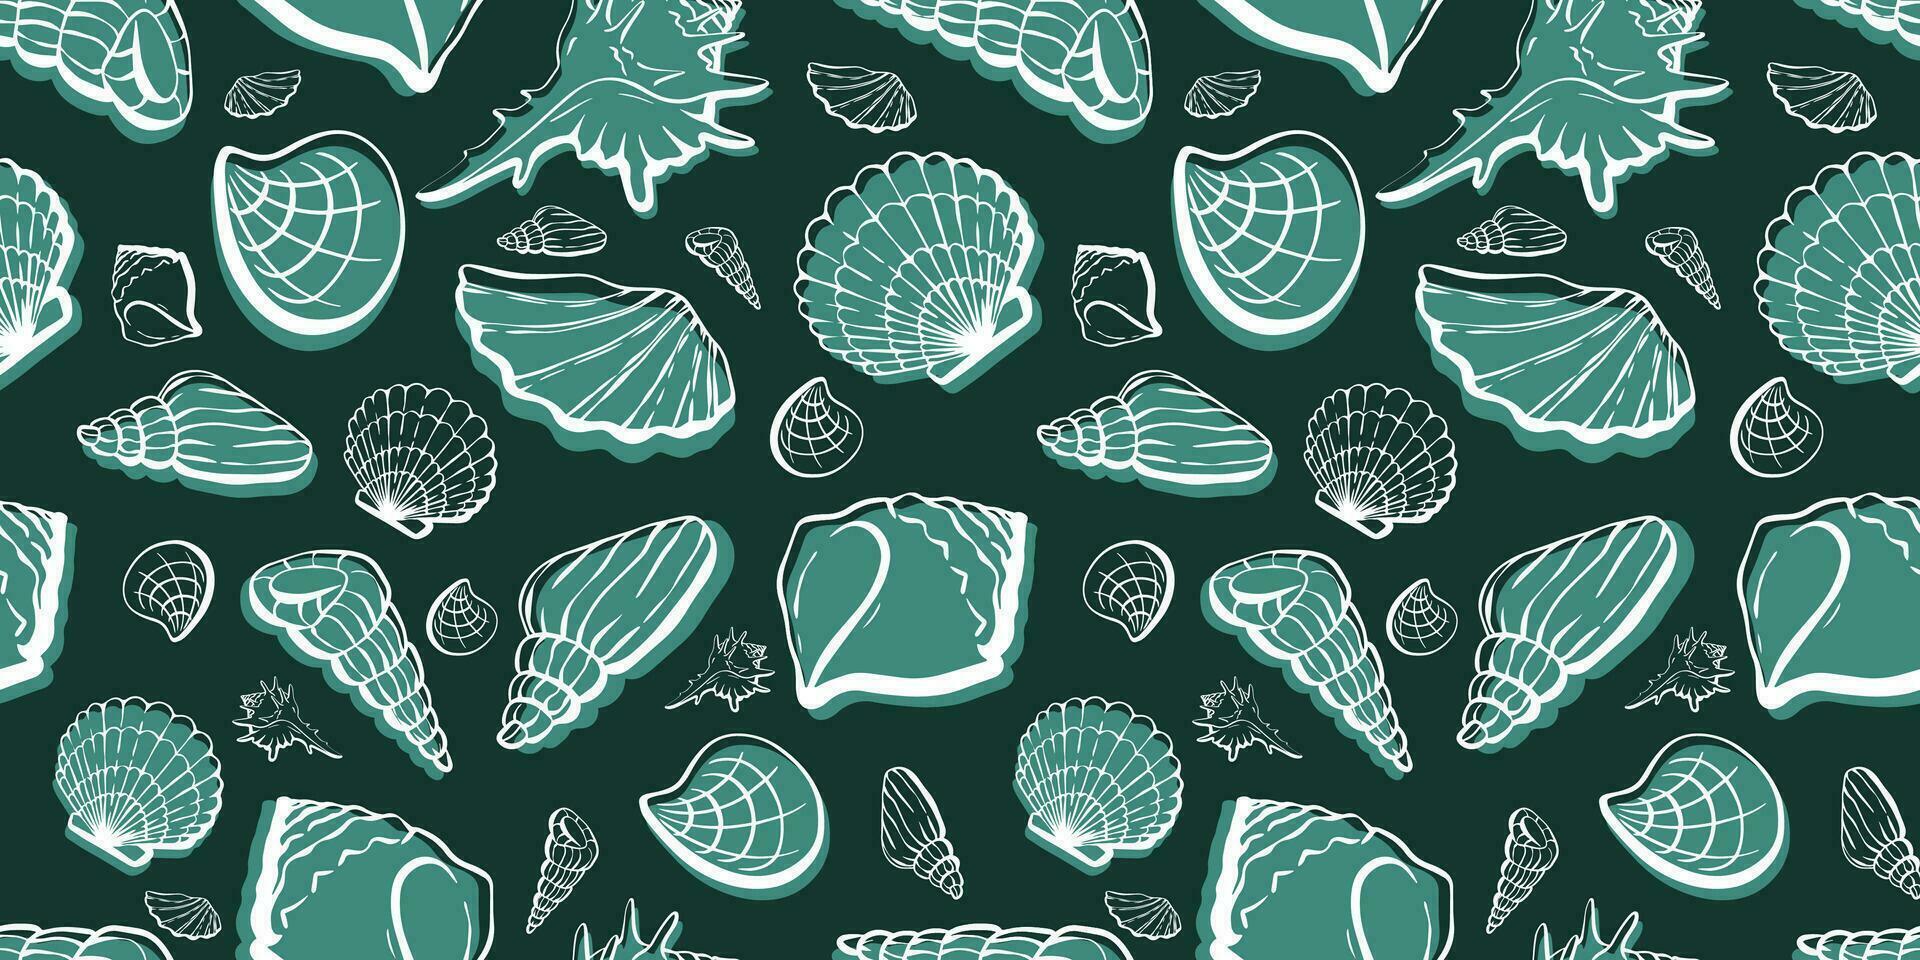 Seashell seamless pattern hand drawn art line underwater clums. Vector illustration in sketch vintage style. Great for card, package, wedding prints, decor.